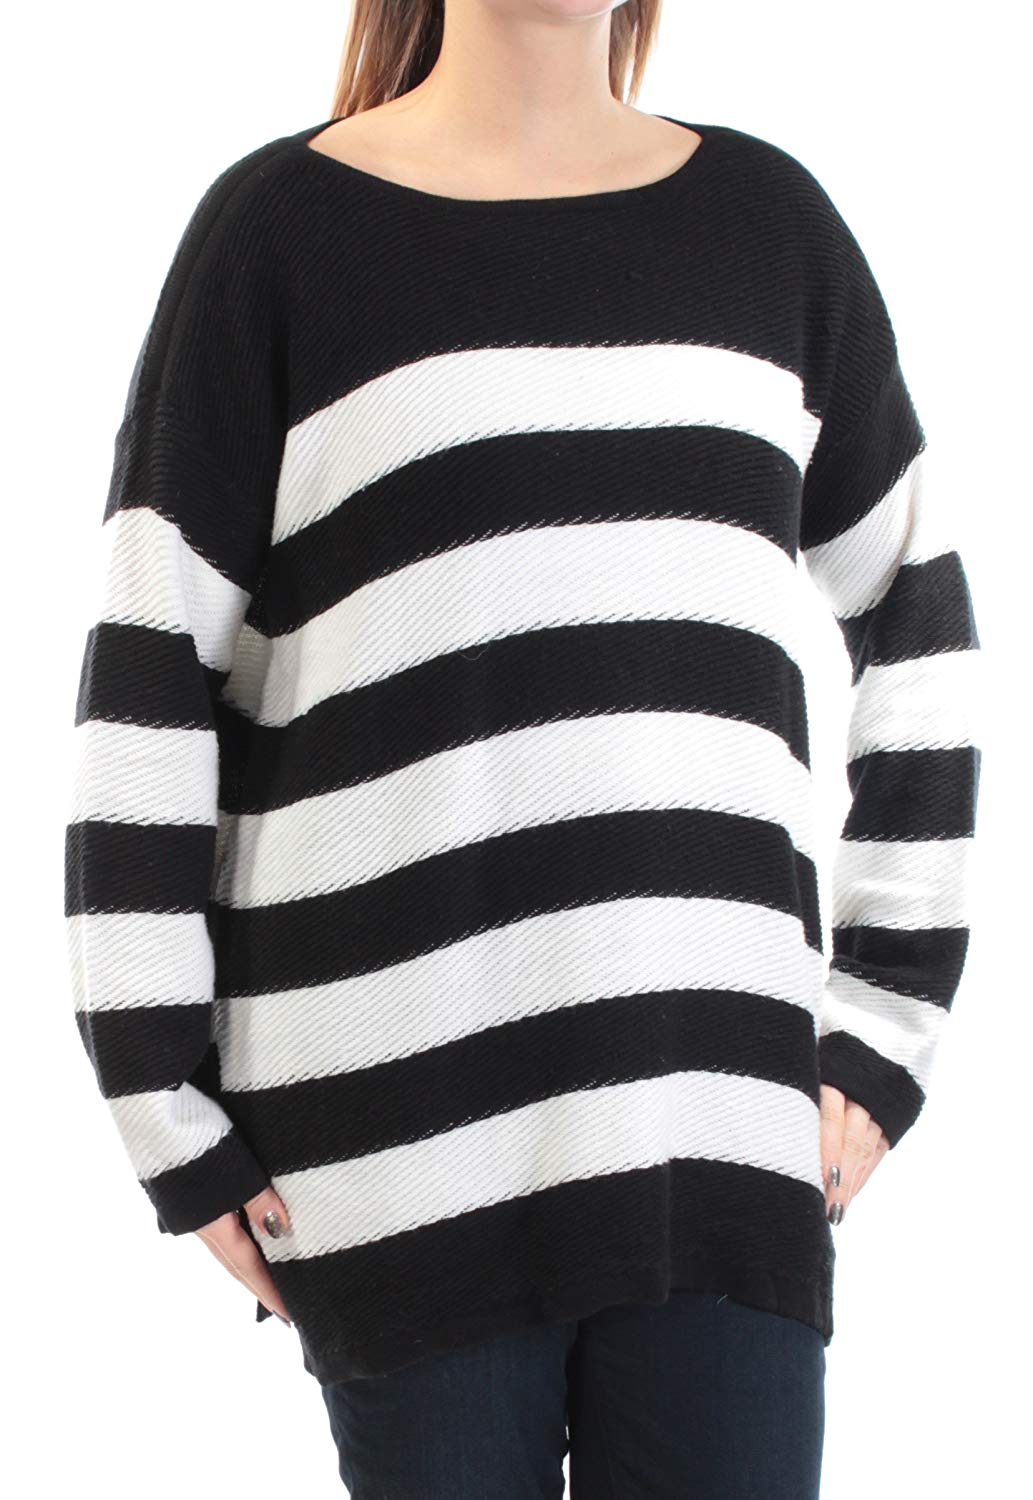 VINCE CAMUTO Women's Long Sleeve Textured Striped Sweater M